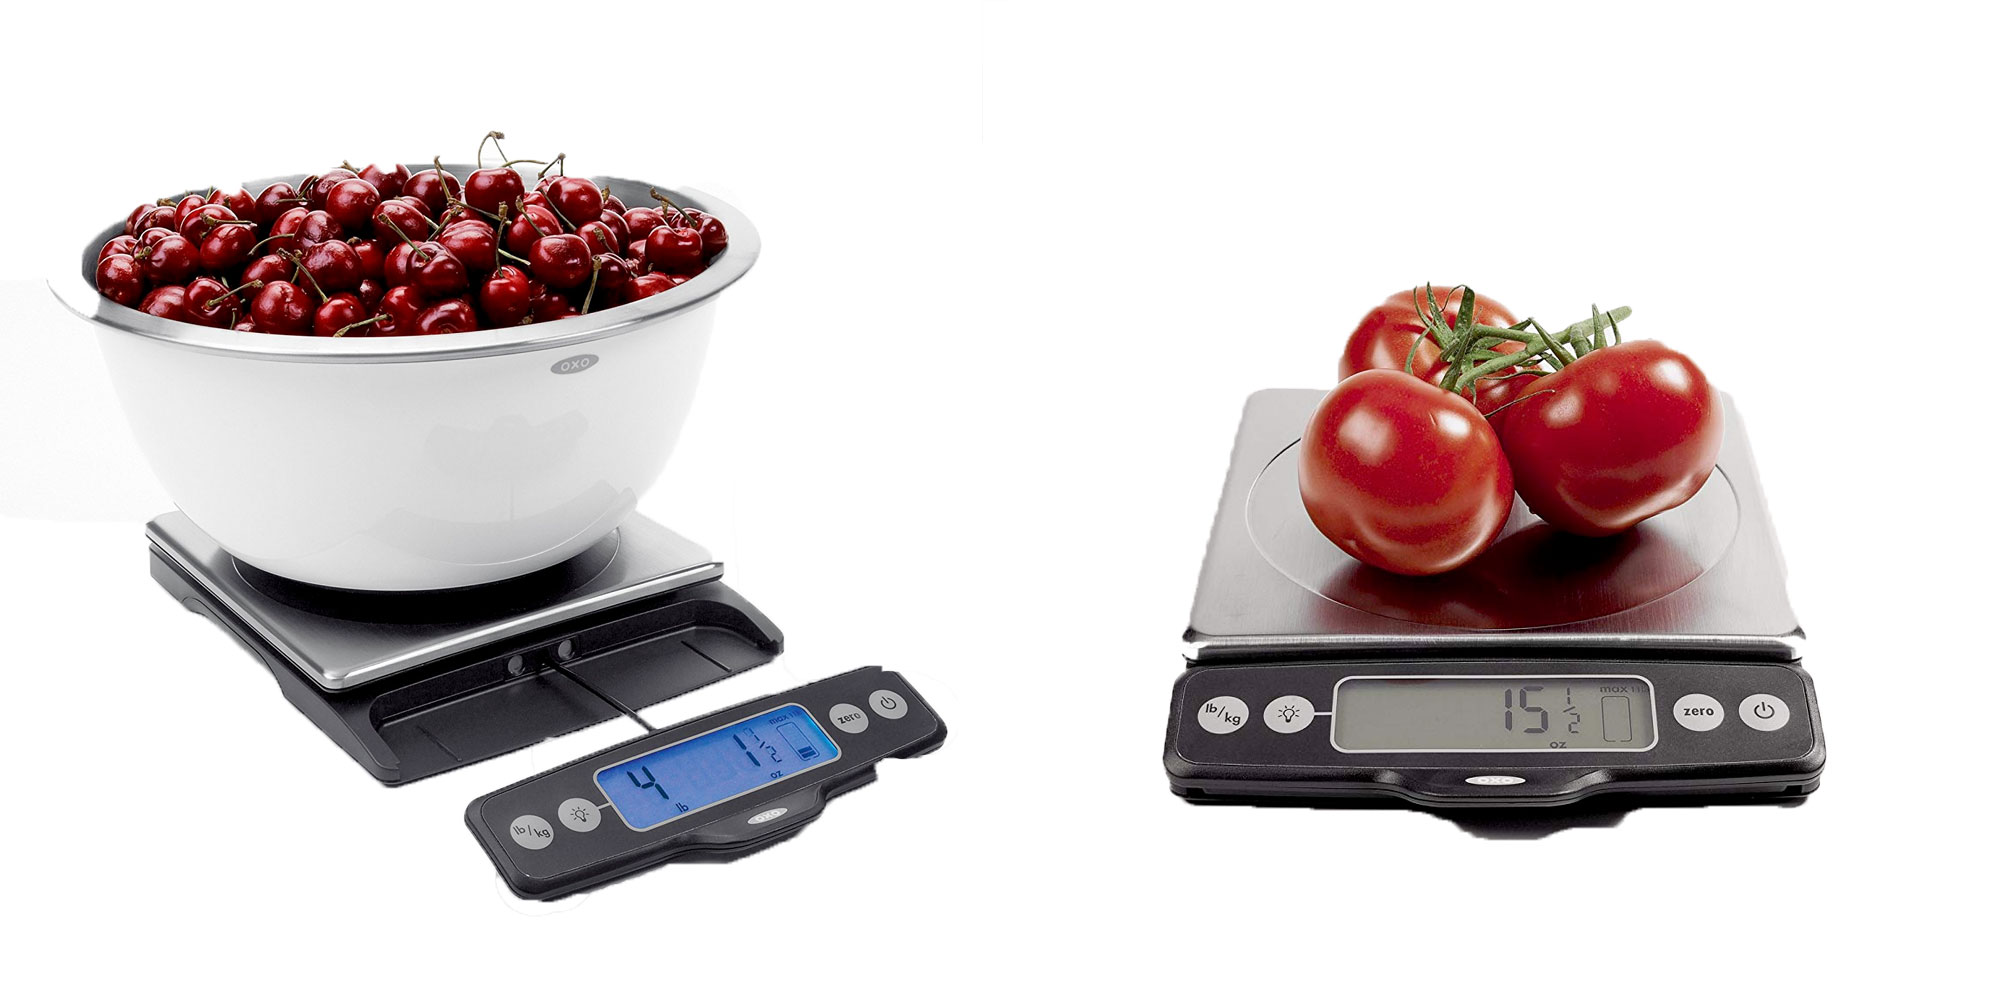 OXO Good Grips 11 lb Stainless Steel Food Scale with Pull Out Display